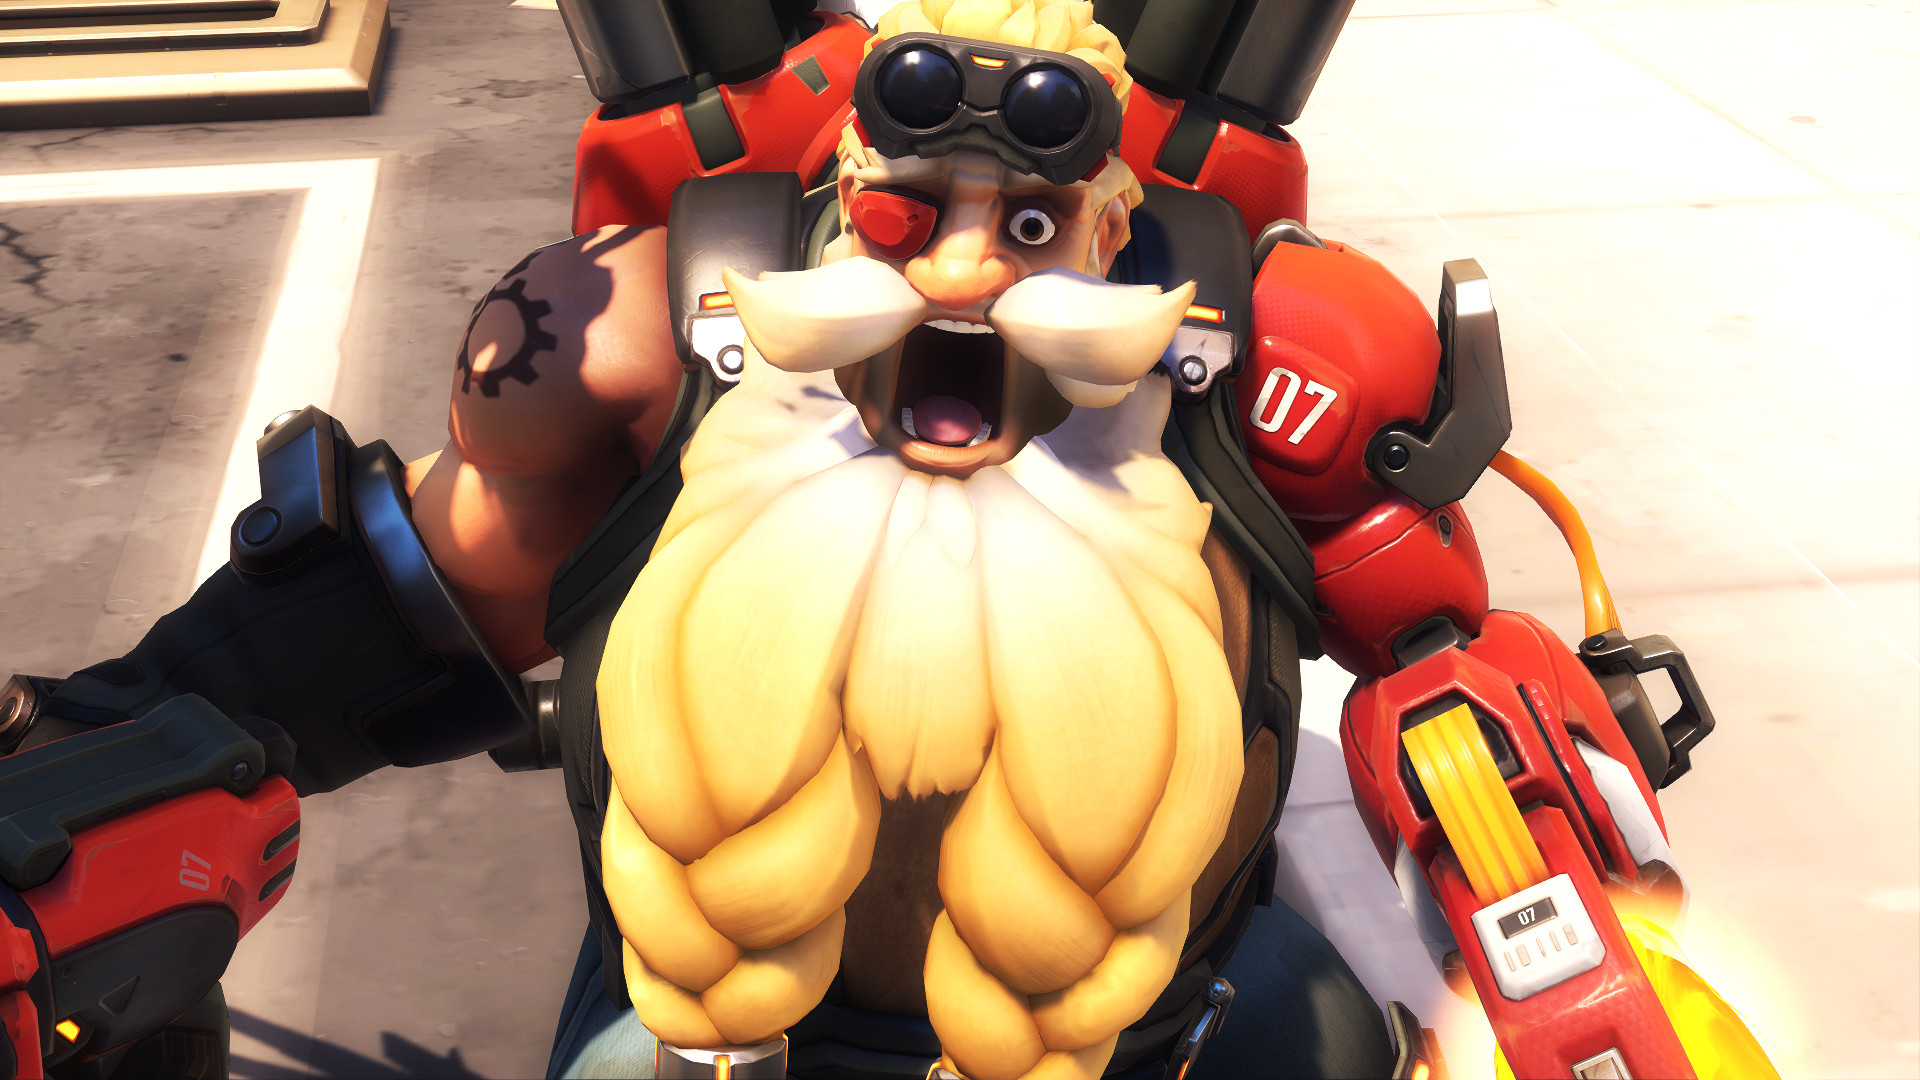 The bearded, short Torbjorn of Overwatch stares, mouth agape, into the camera